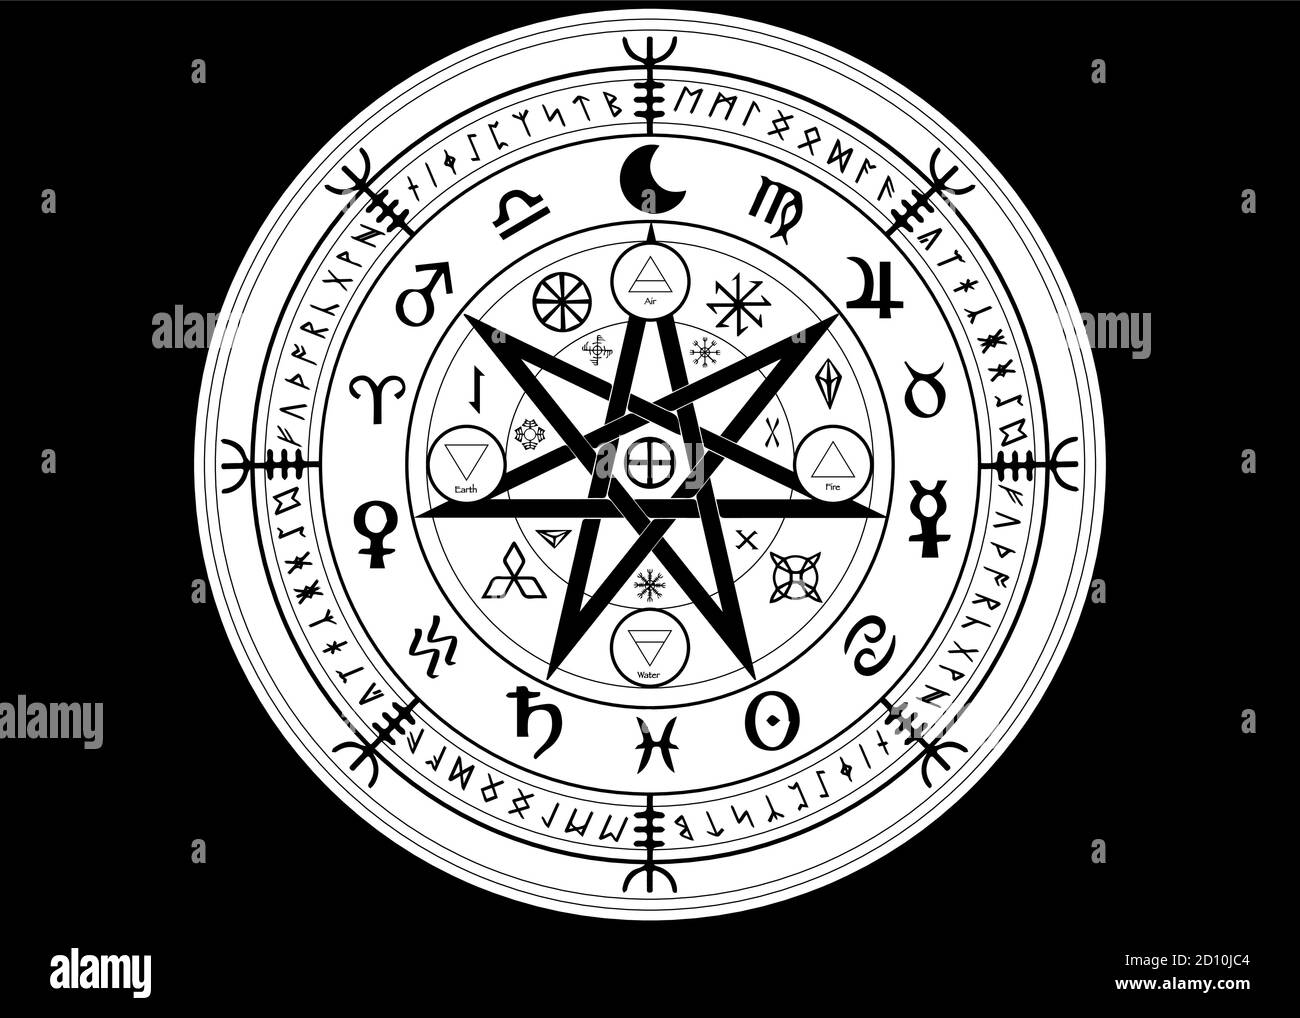 Wiccan symbol of protection. Set of Mandala Witches runes, Mystic Wicca divination. Ancient occult symbols, Earth Zodiac Wheel of the Year Wicca sign Stock Vector